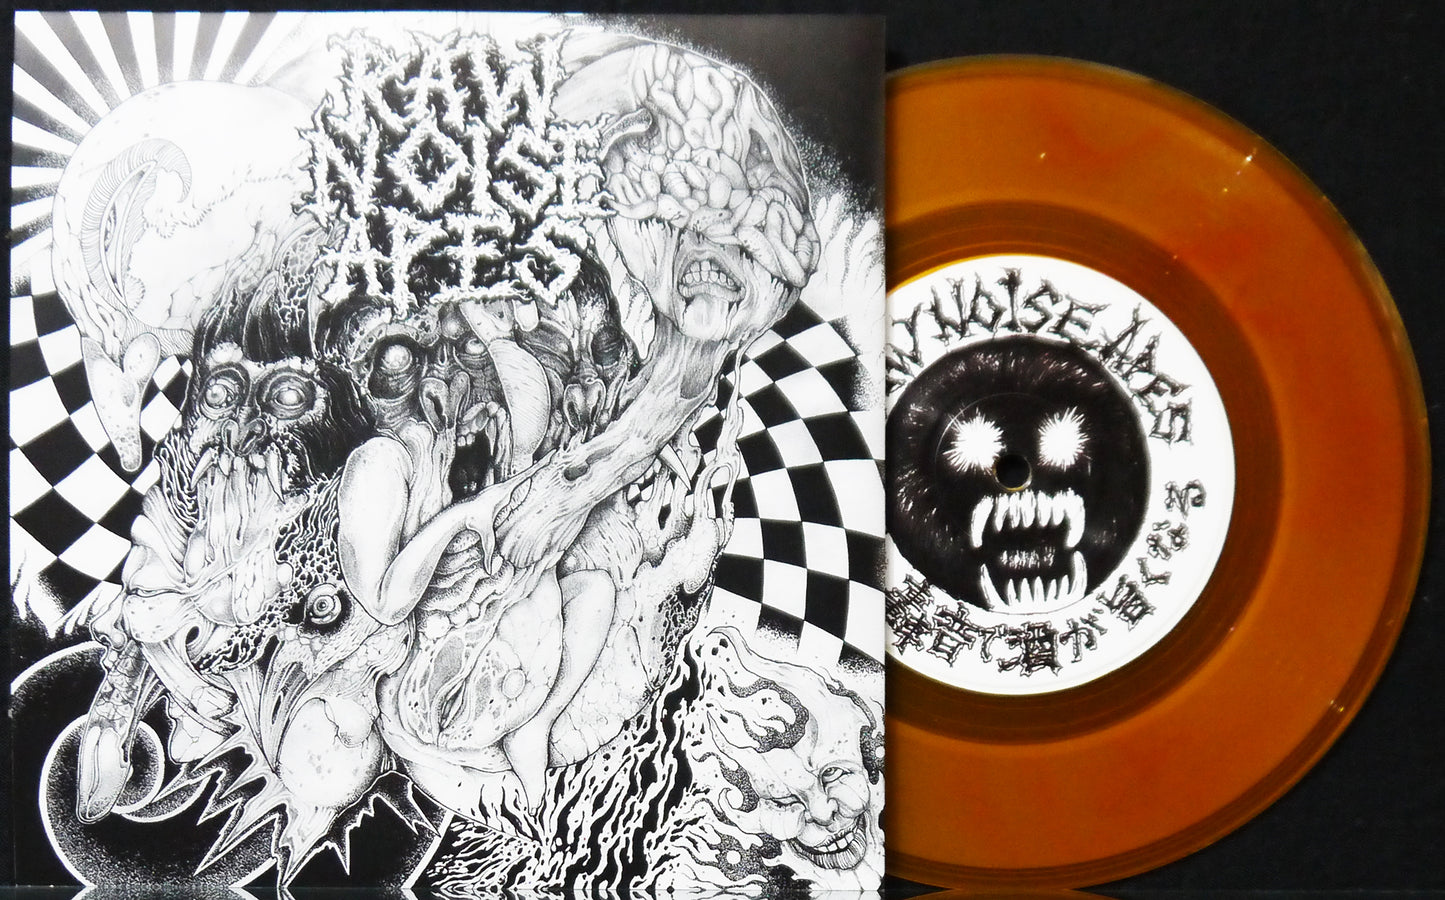 DEAD ISSUE / RAW NOISE APES - Split 7"